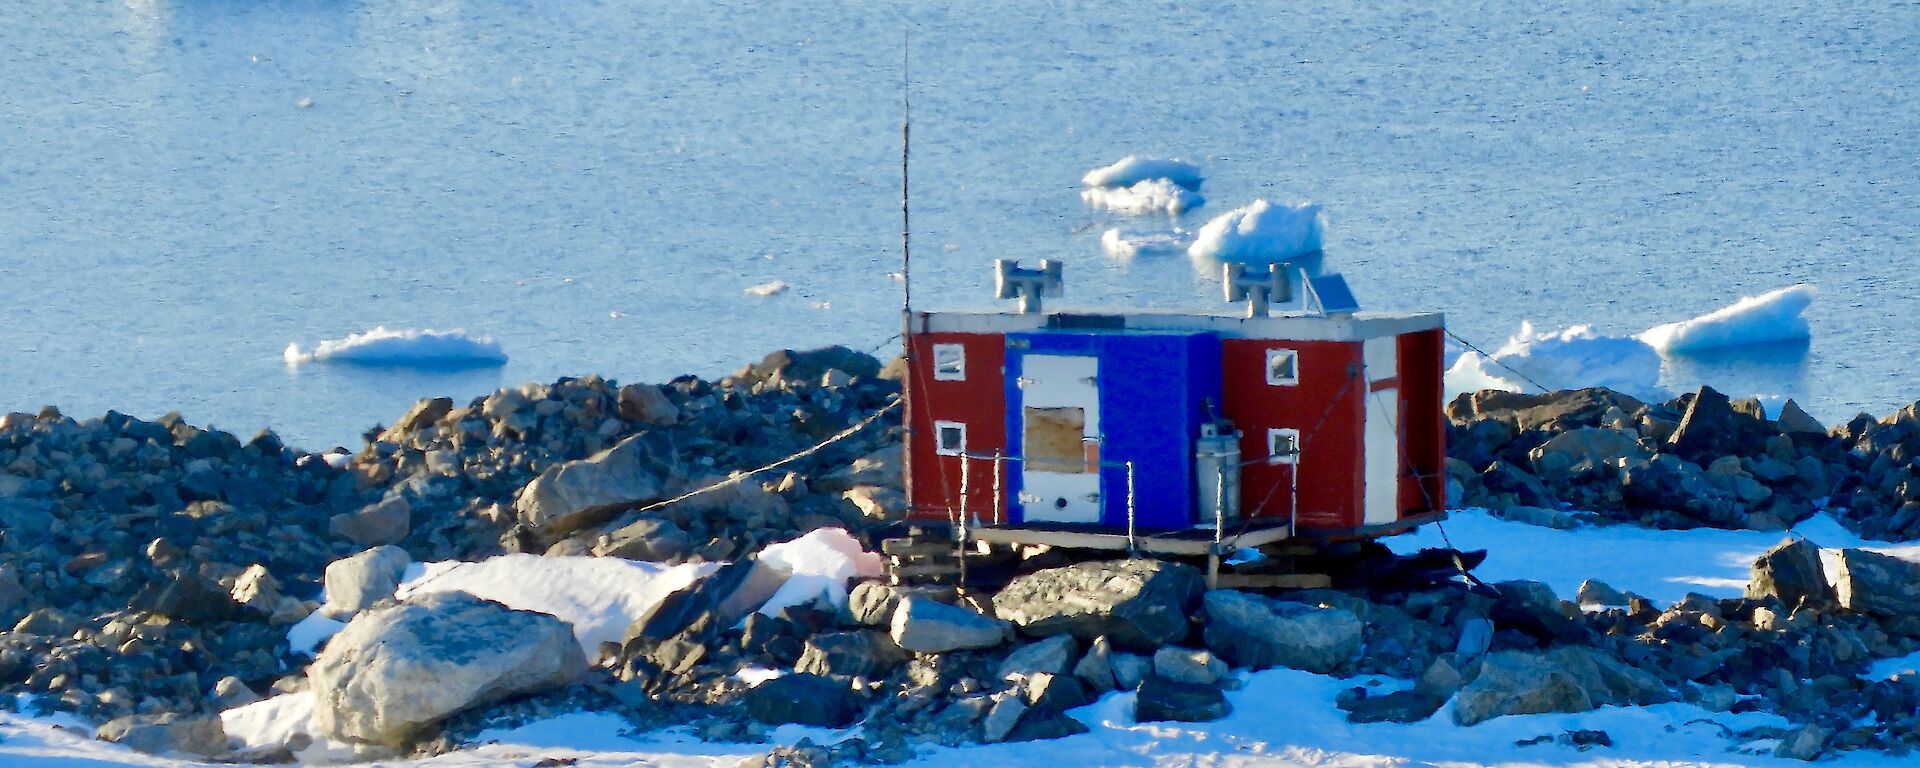 Jack’s Donga which is red and blue sitting on rocks overlooking icebergs and the water